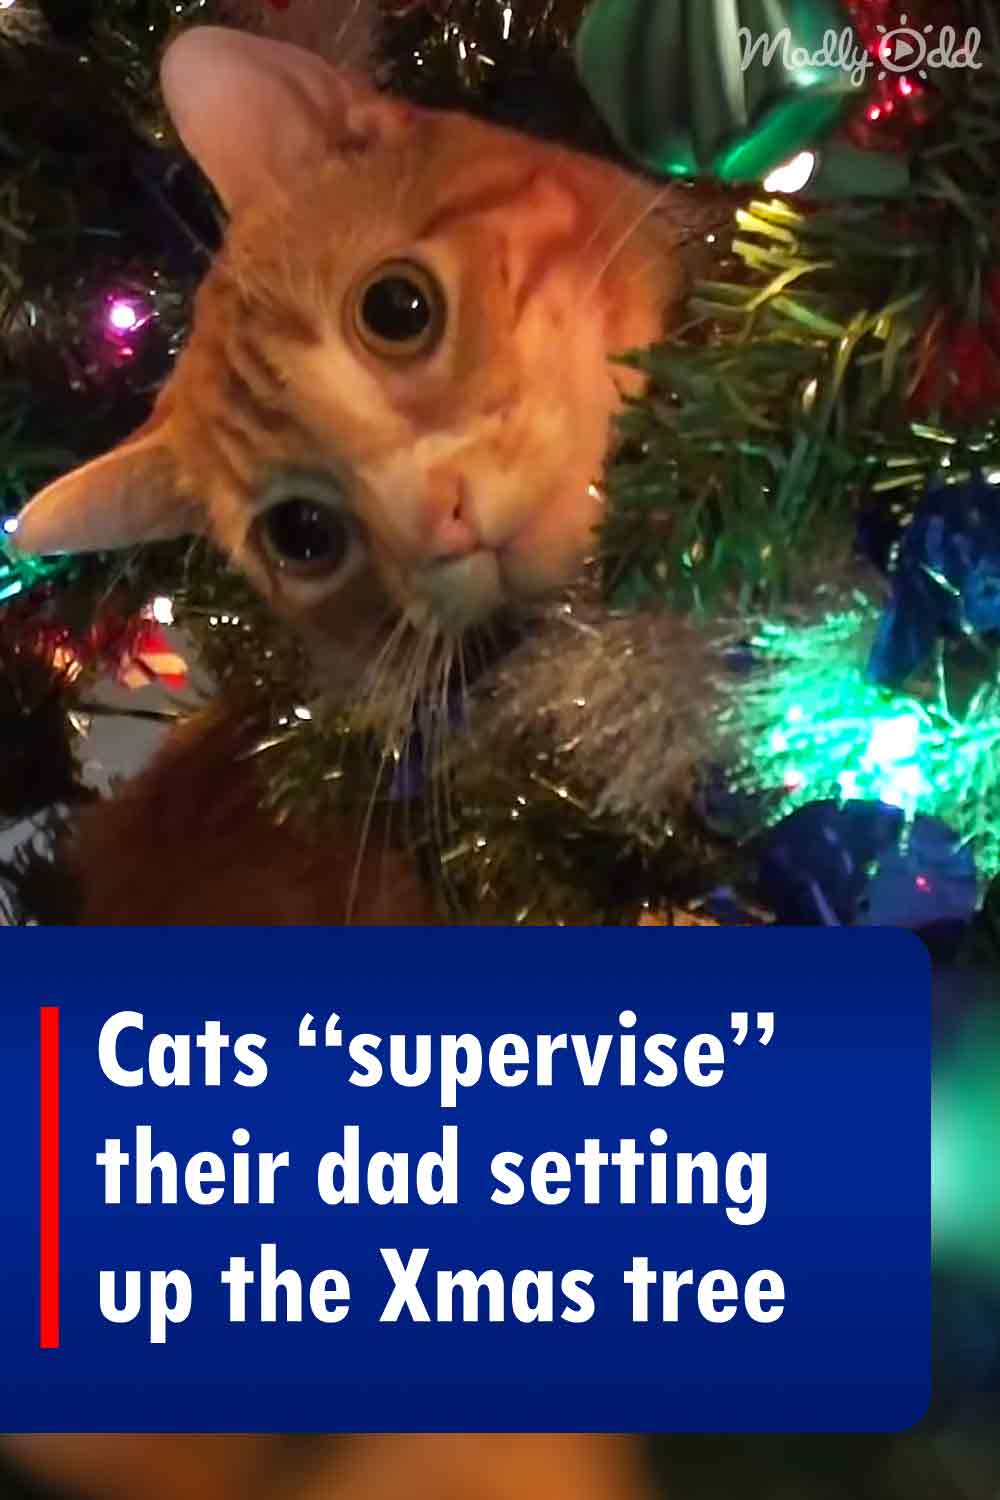 Cats “supervise” their dad setting up the Xmas tree